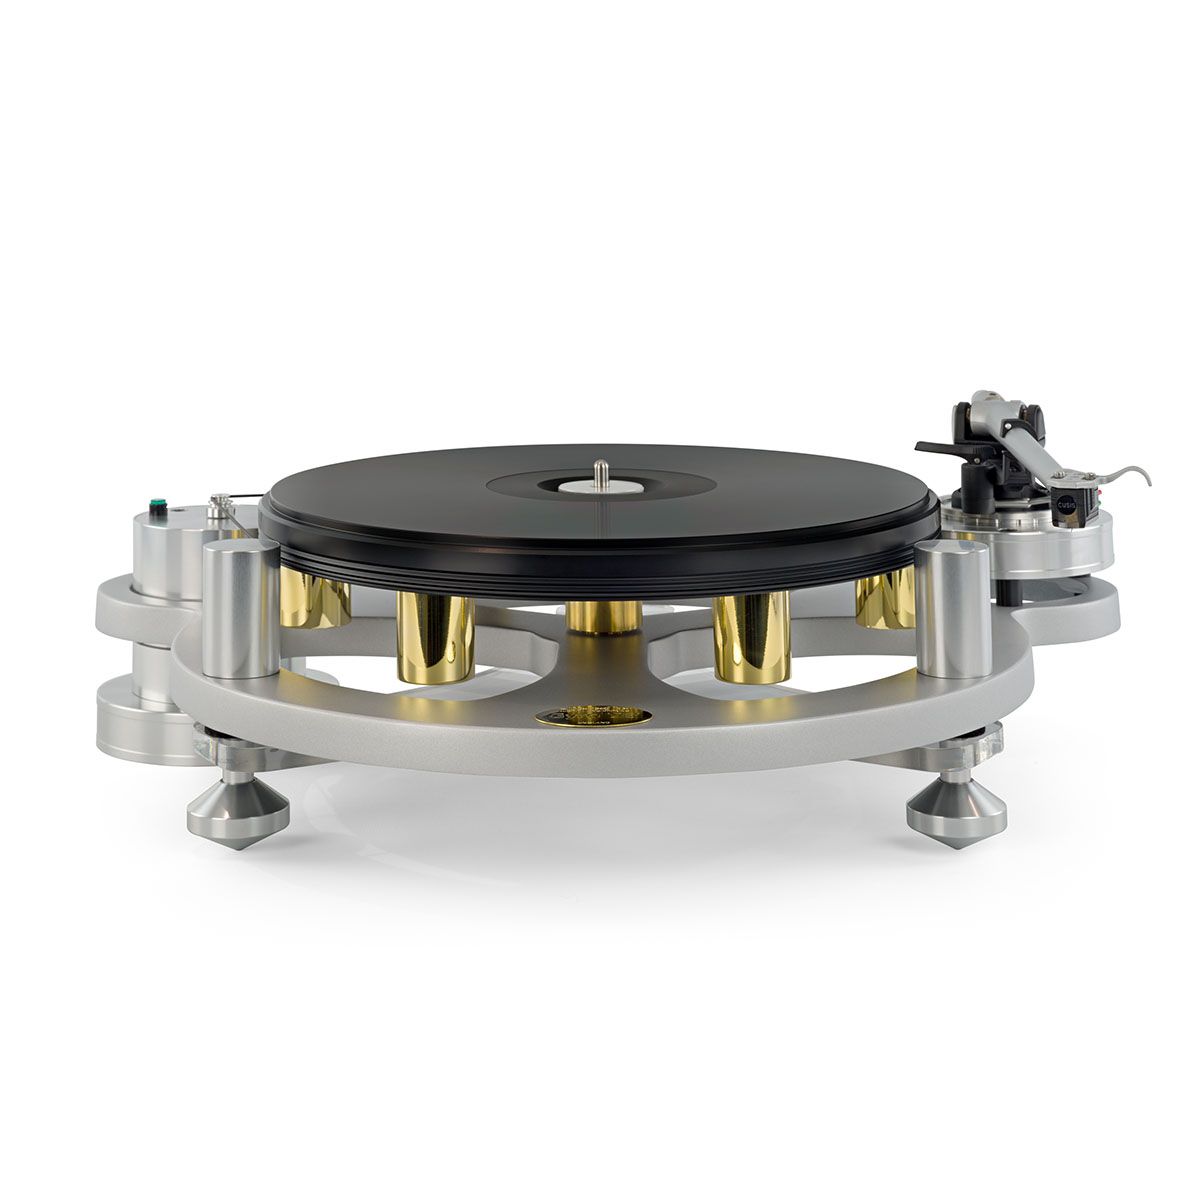 MICHELL GYRO SE Turntable side view in silver
